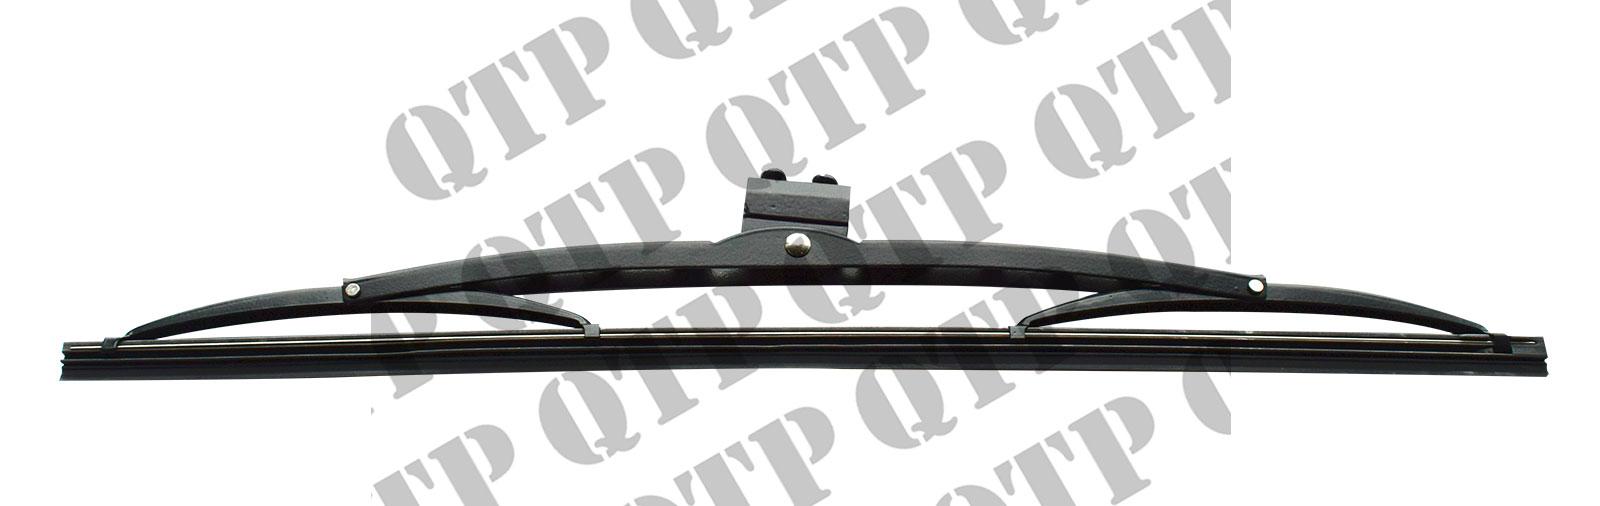 thumbnail of Wiper Blade for New 1008 Motor 400mm